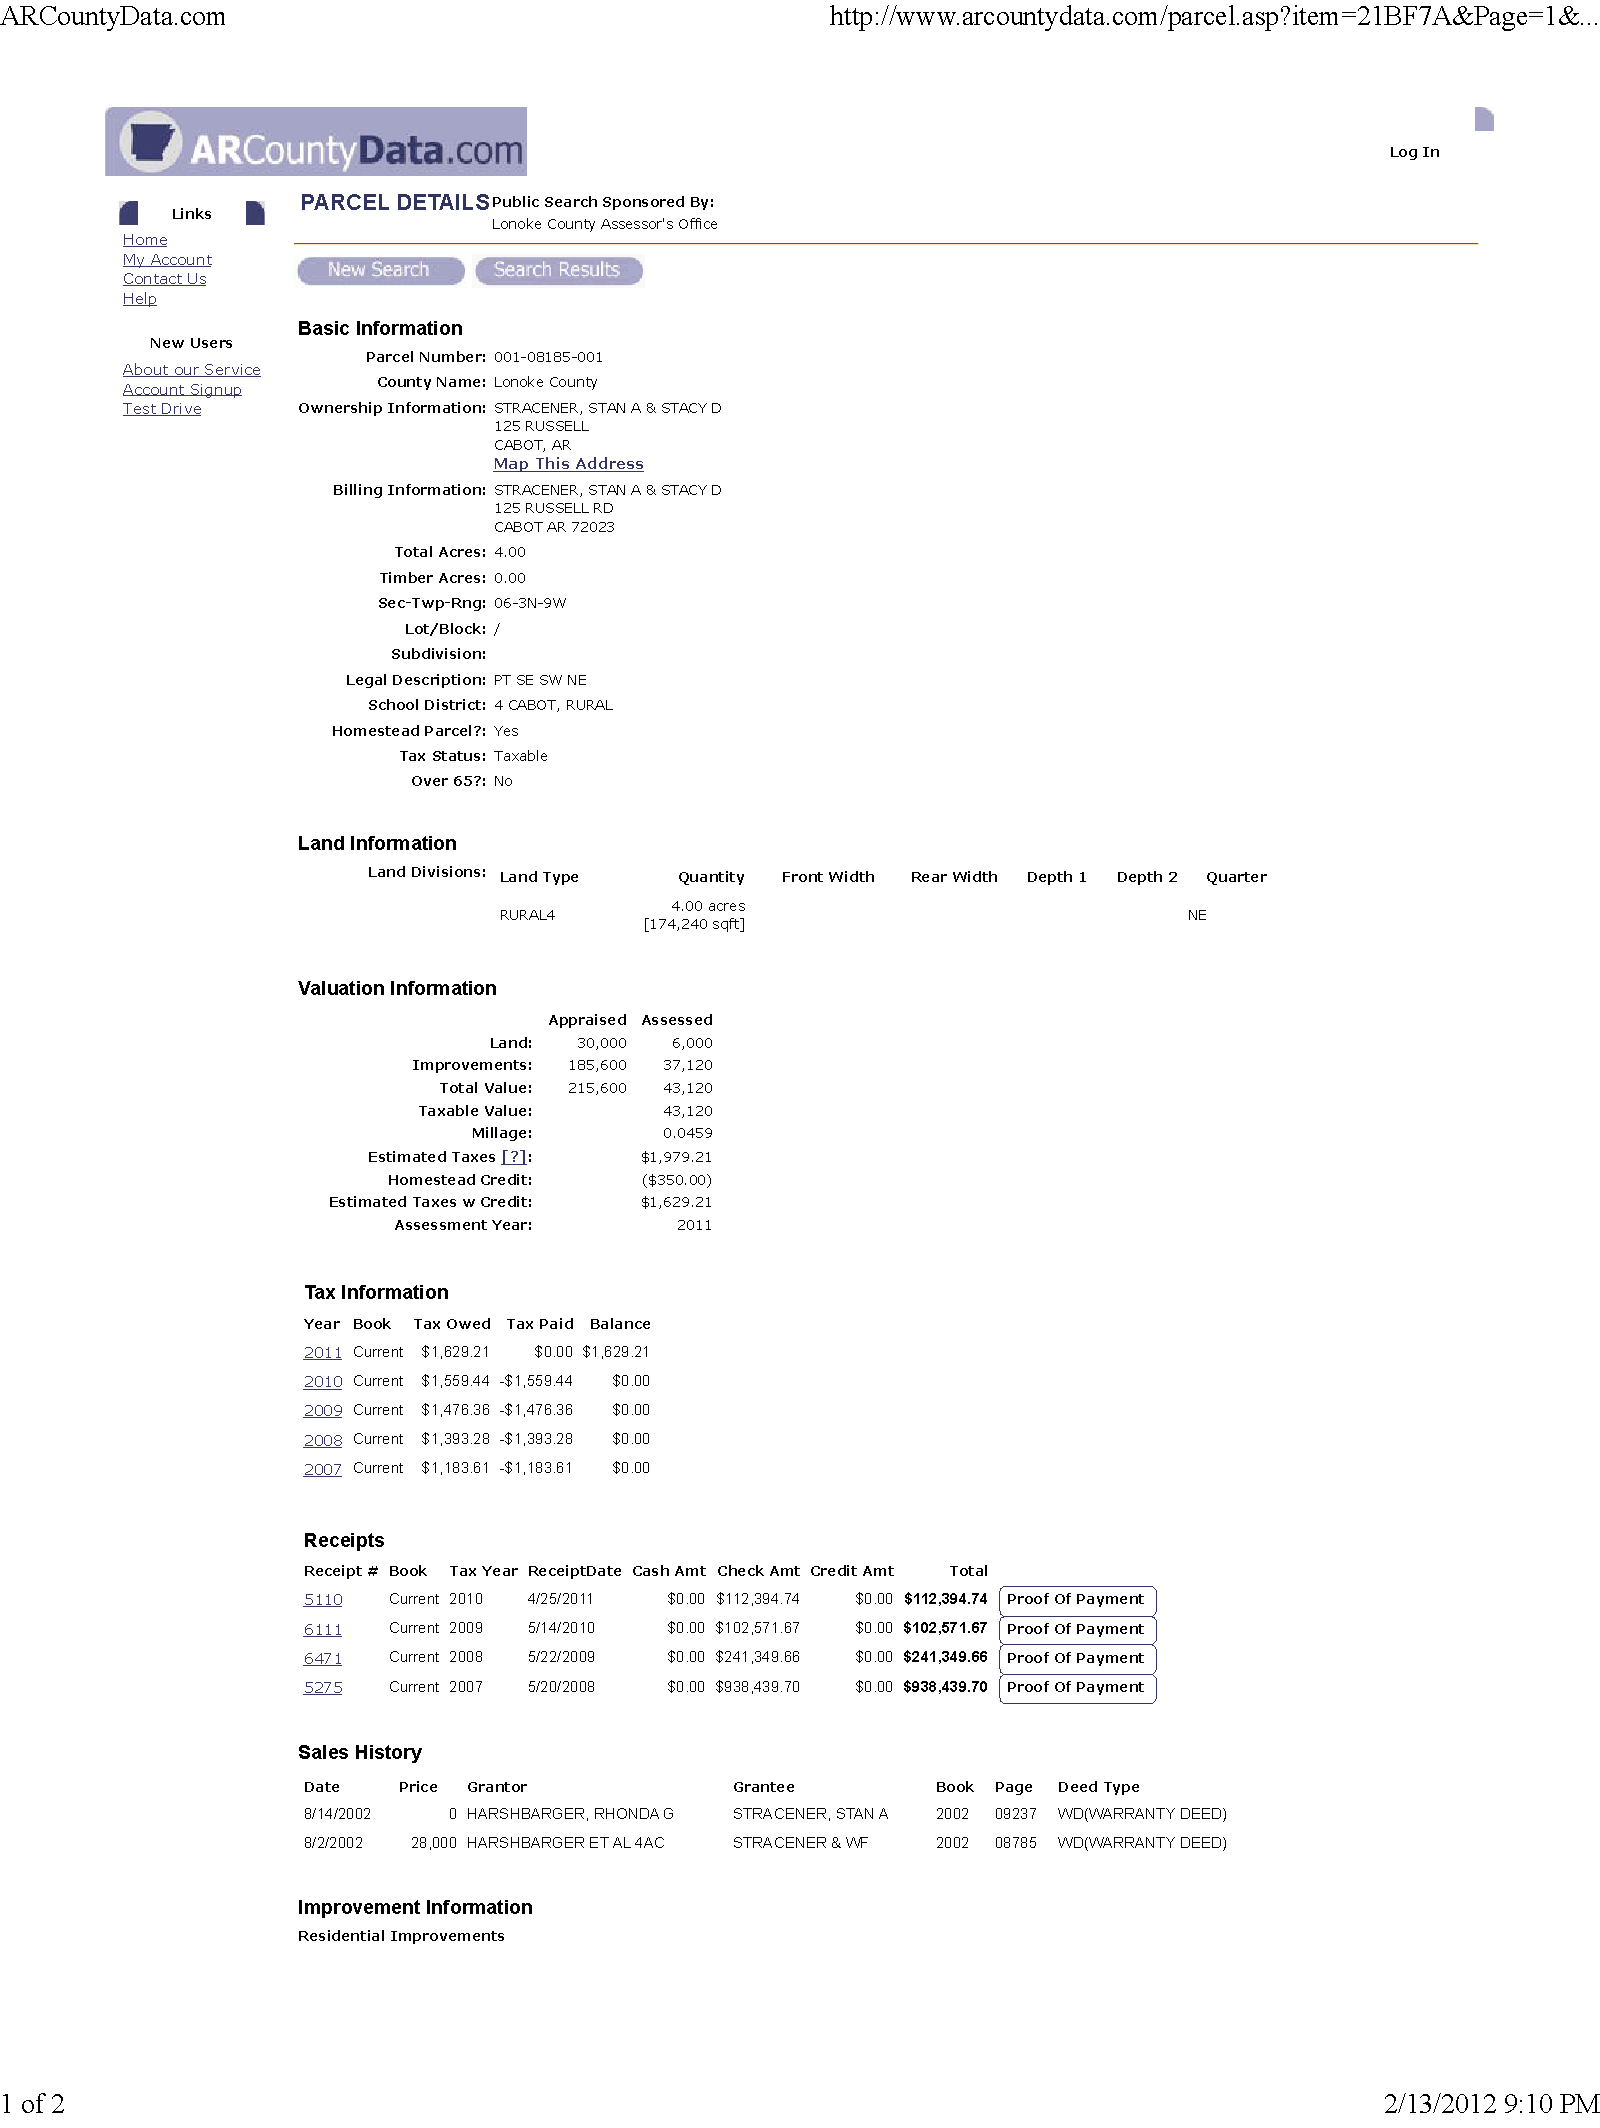 Copy of stracener stacy county tax info1.png